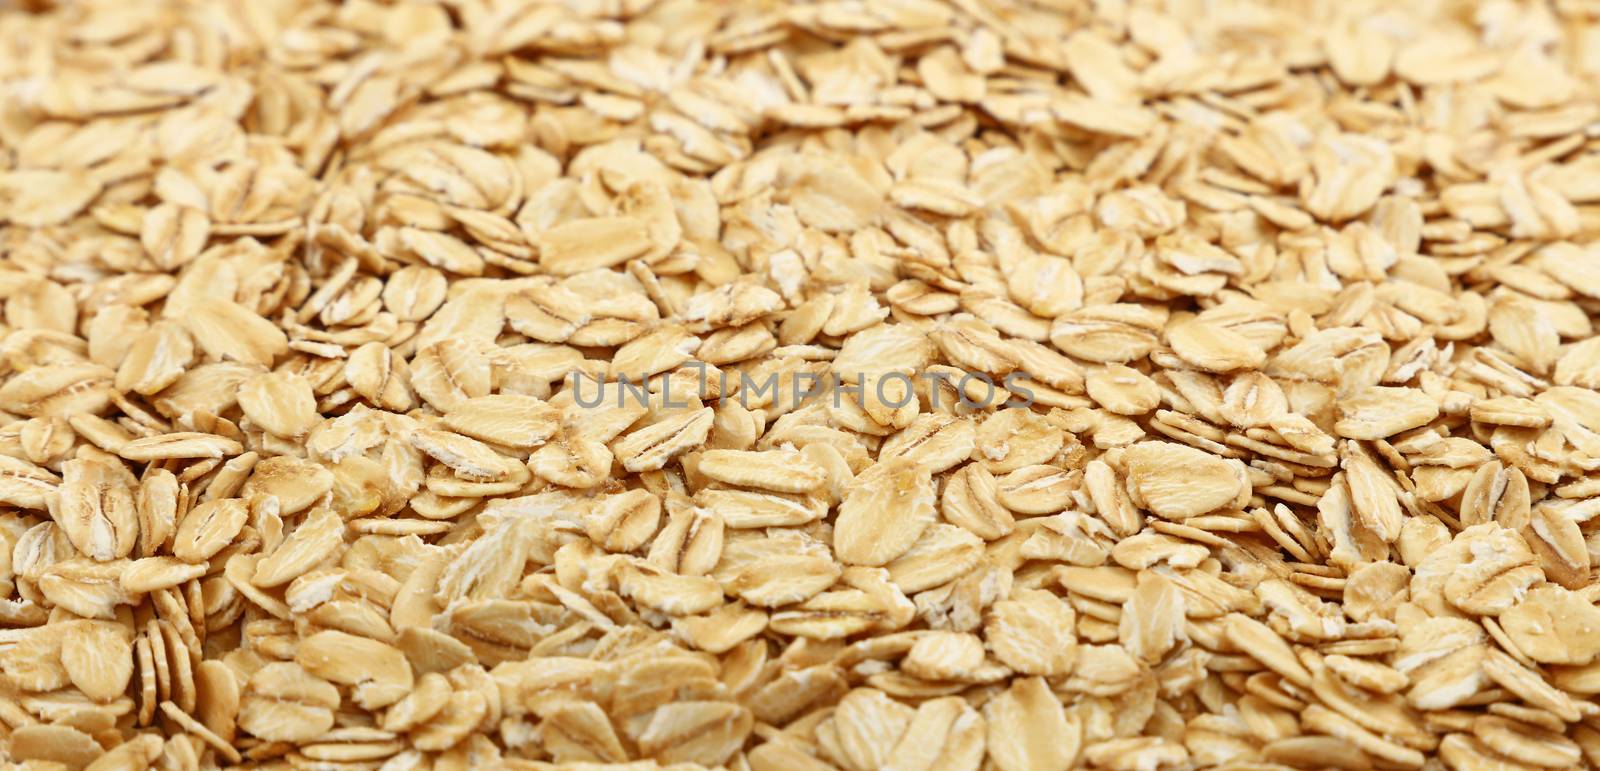 Flakes of porridge oat grits for oatmeal close up pattern background, low angle view, selective focus